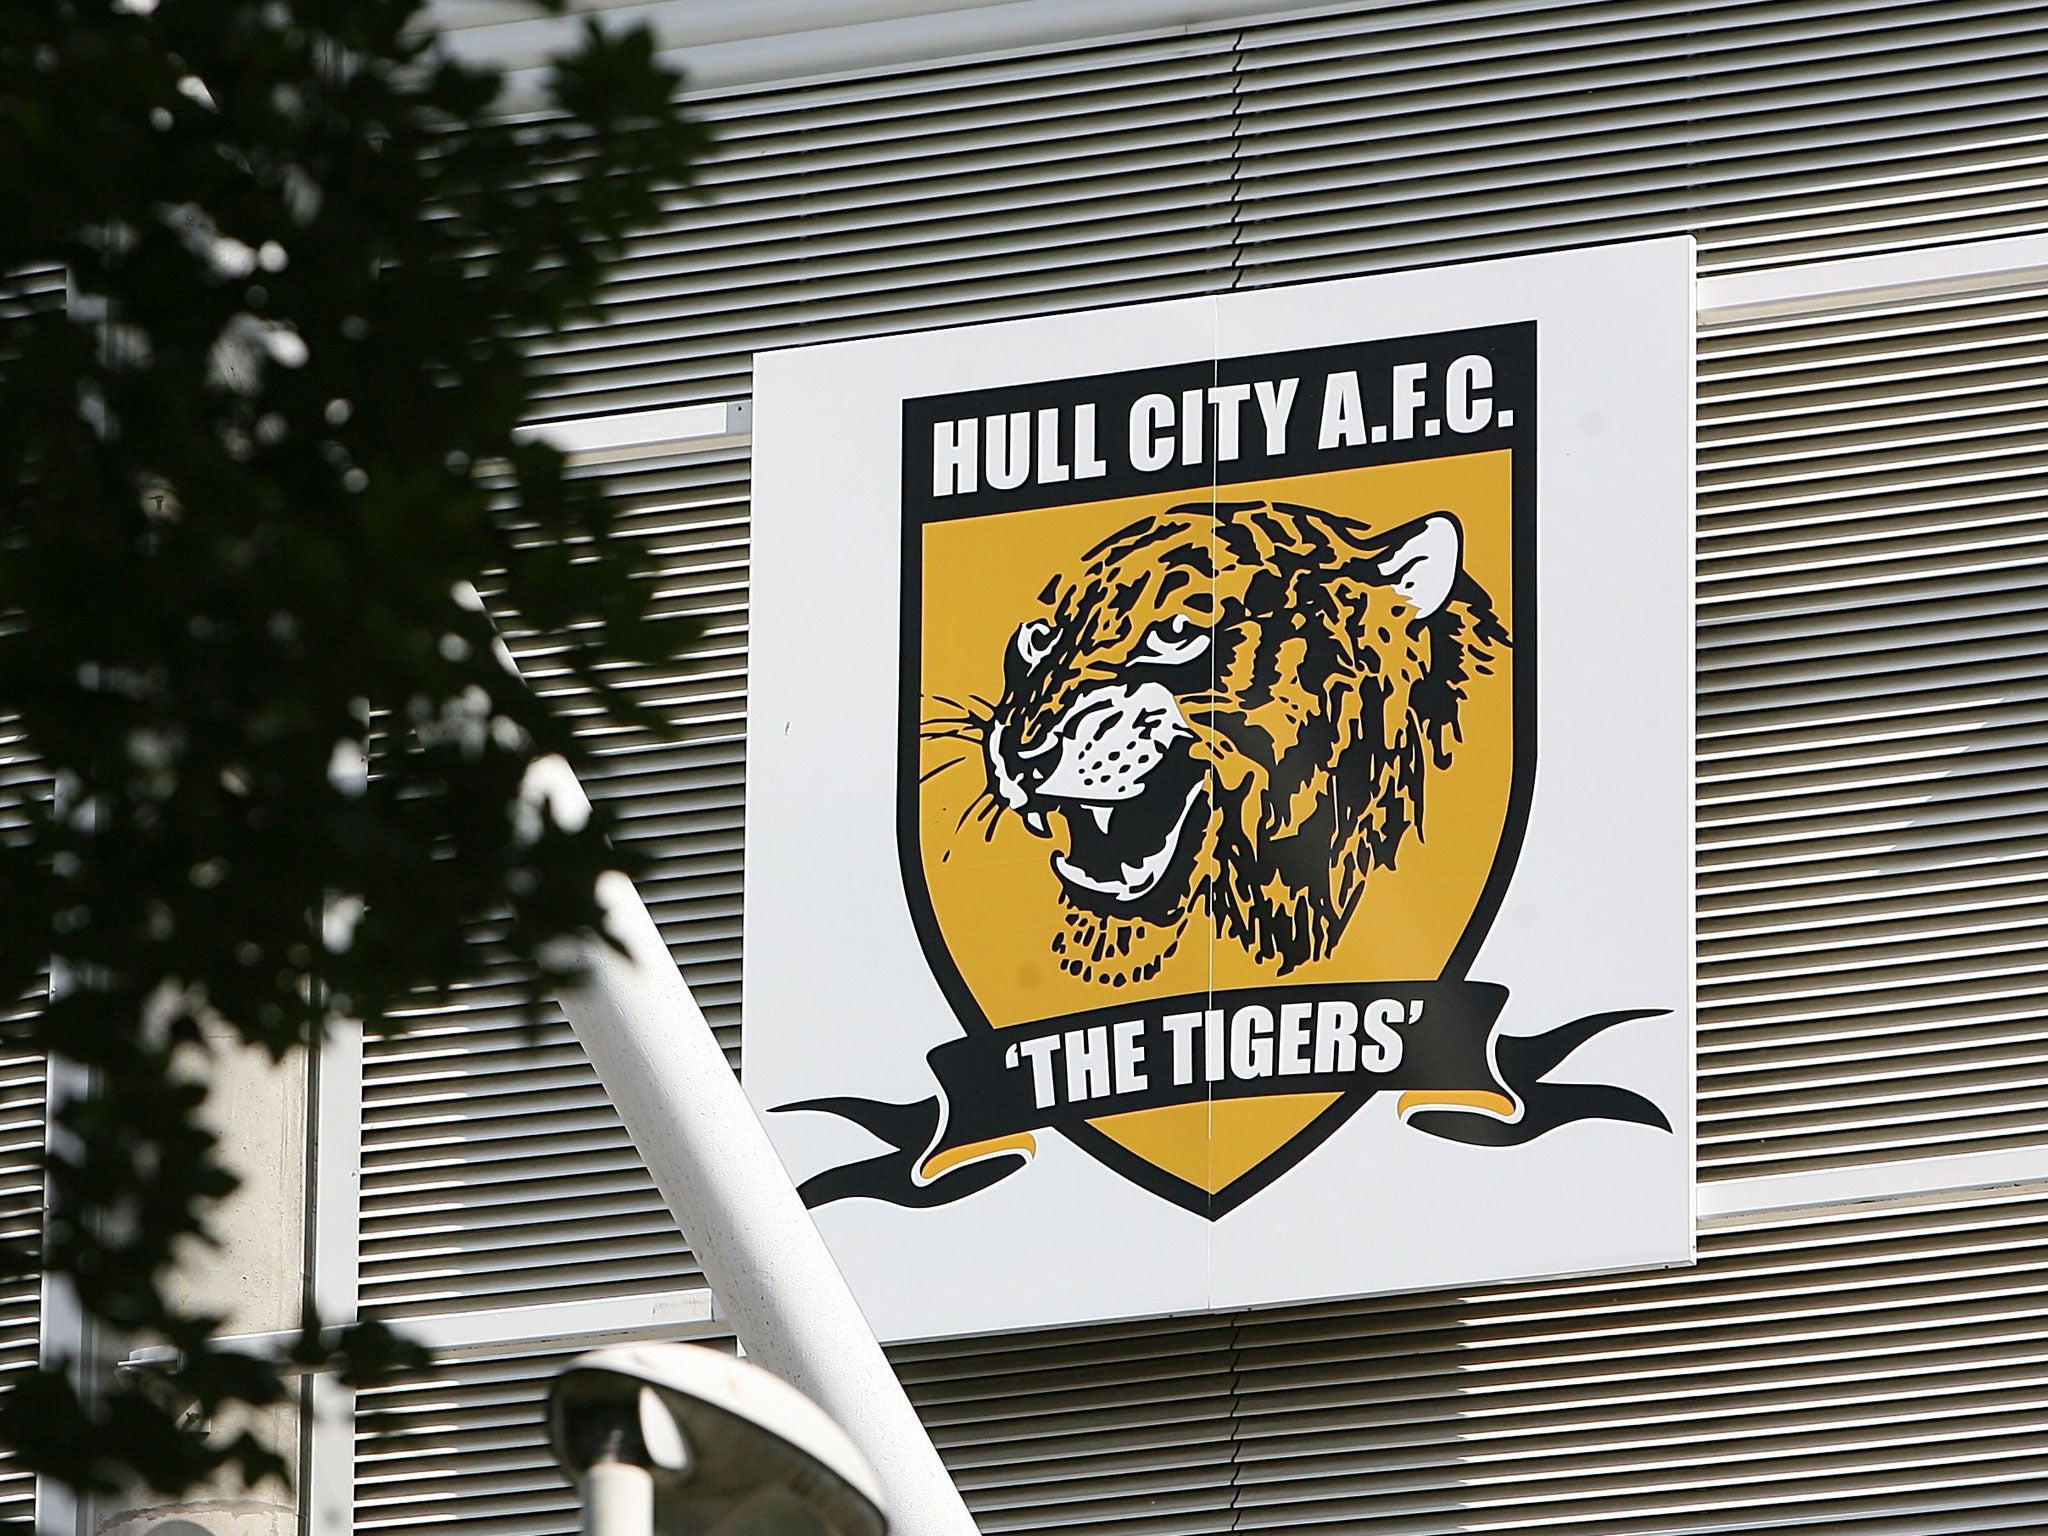 Hull City’s owner has described supporters protesting against his plan to change the name to Hull Tigers as 'hooligans' and warned he will put the club up for sale if the fans do not accept his authority